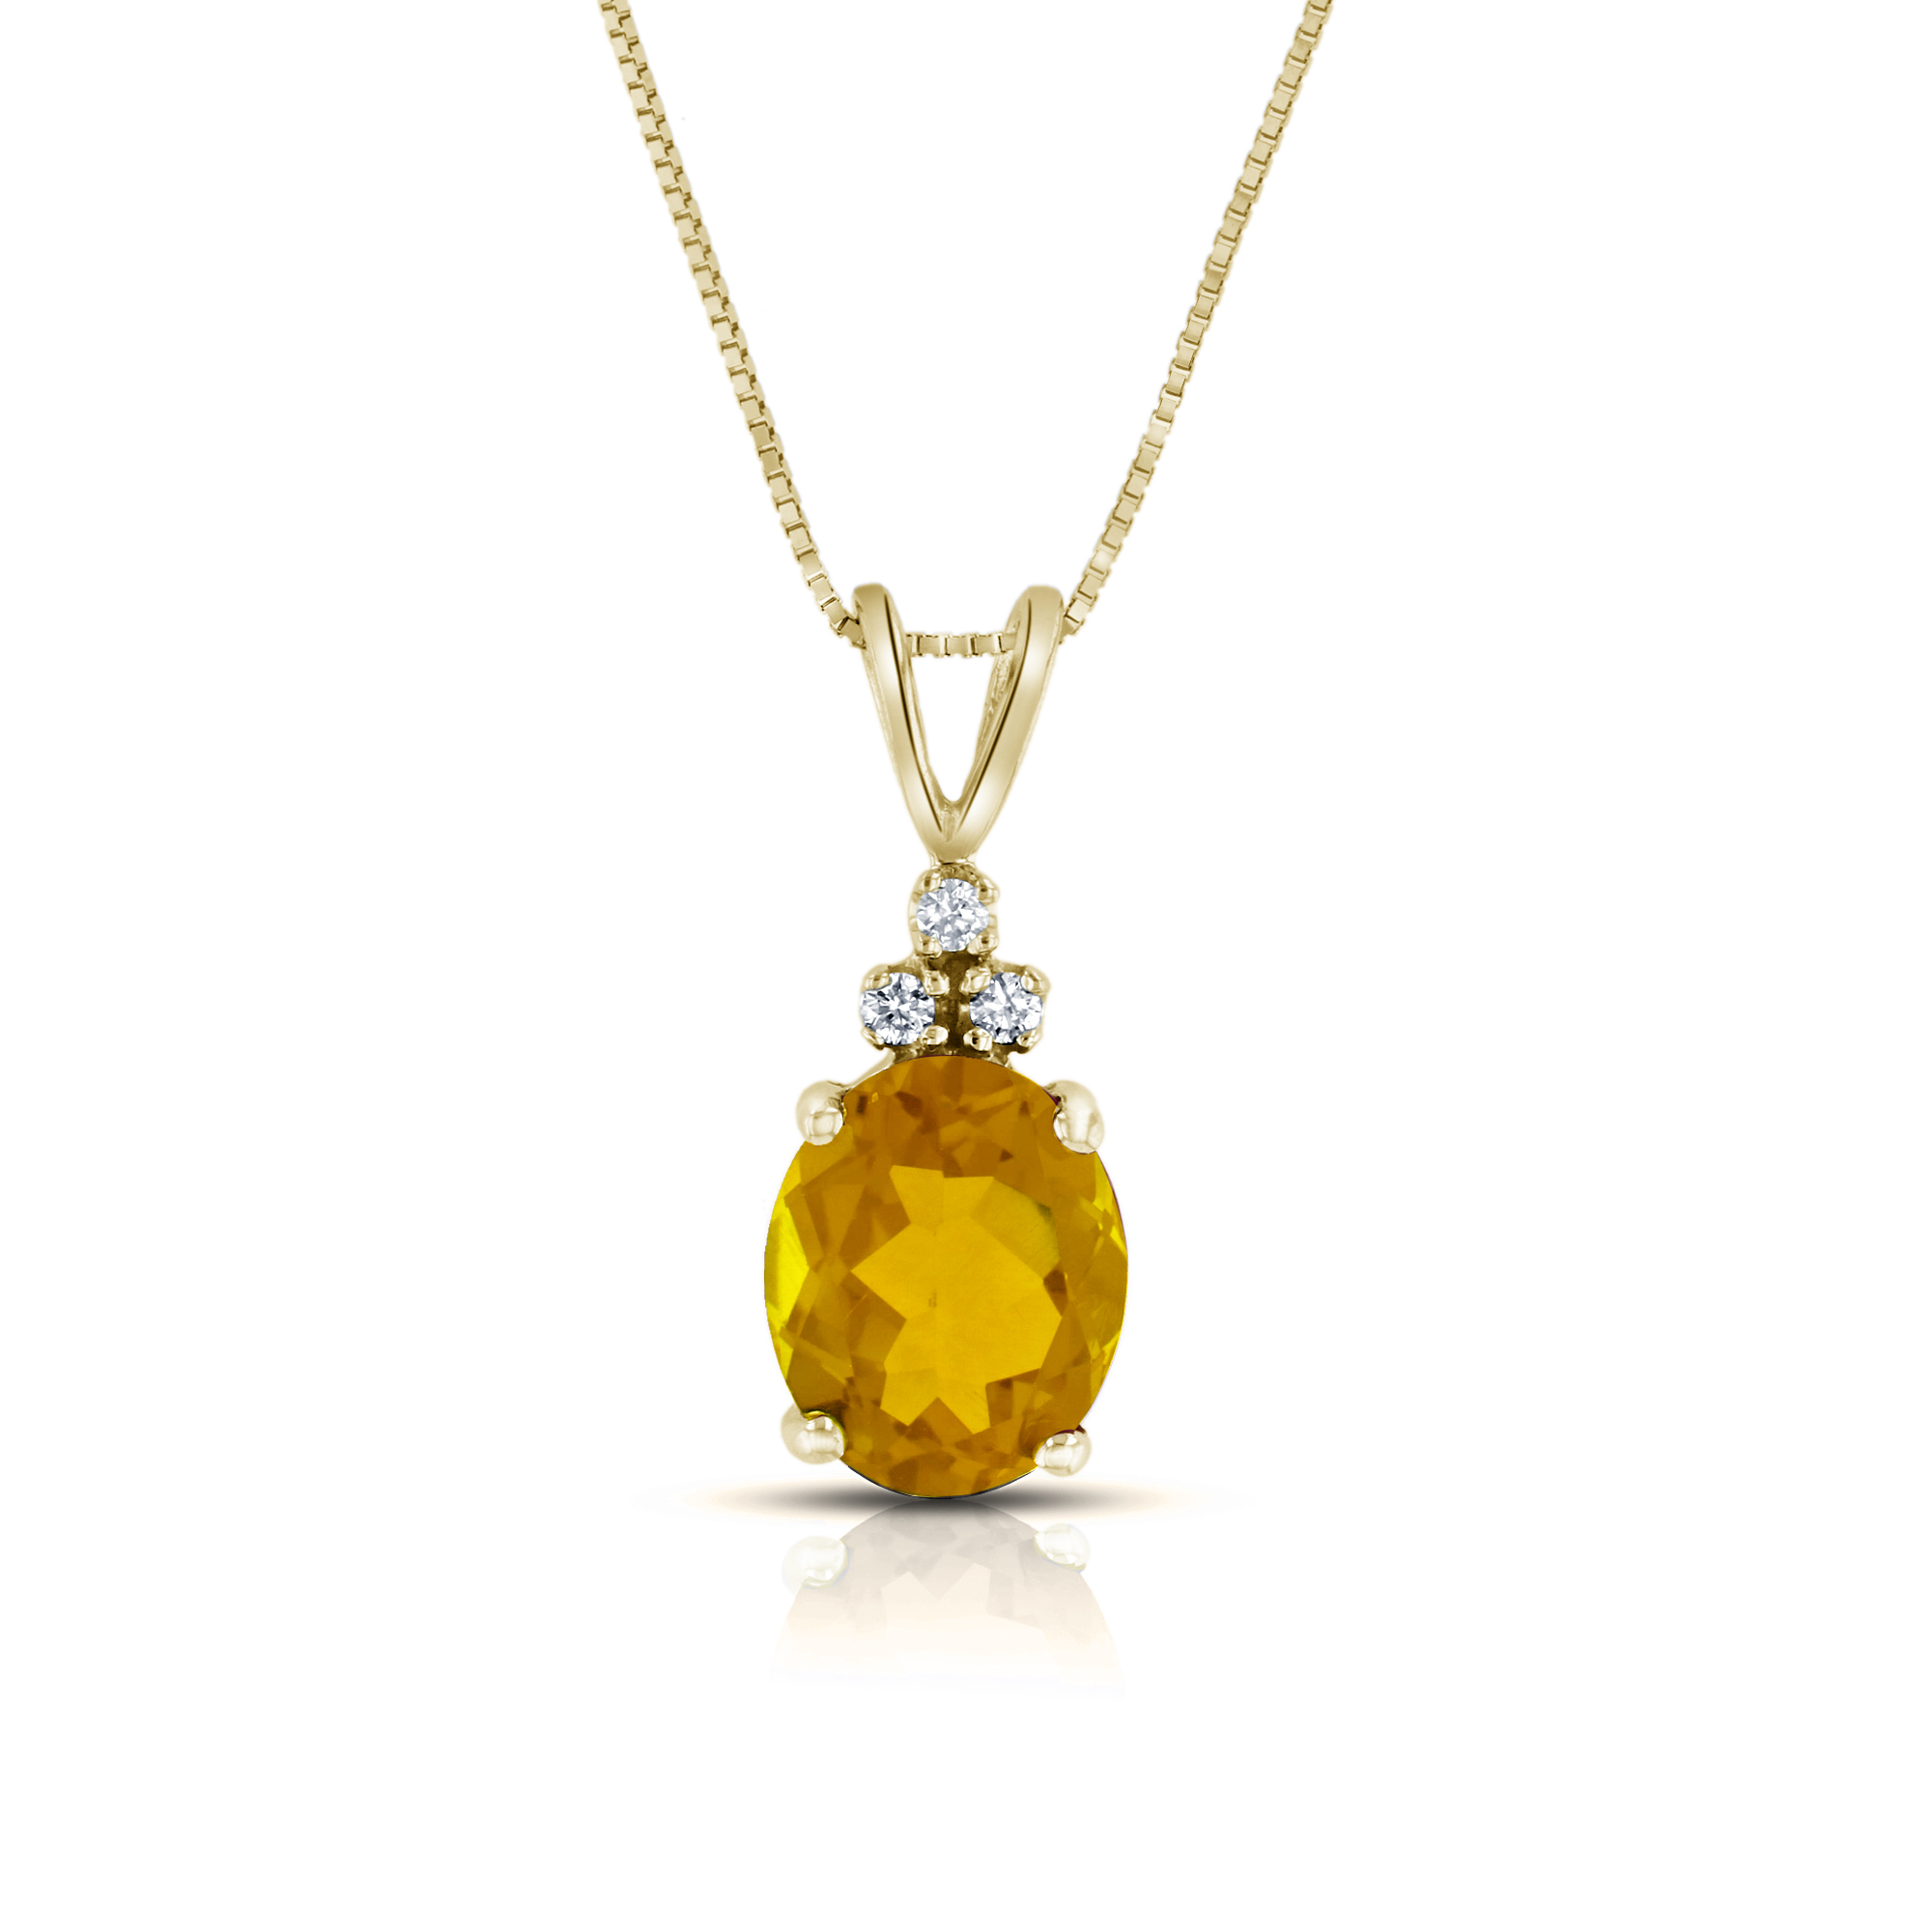 View 0.04ctw Diamond and Citrine Pendant in 14k Yellow Gold